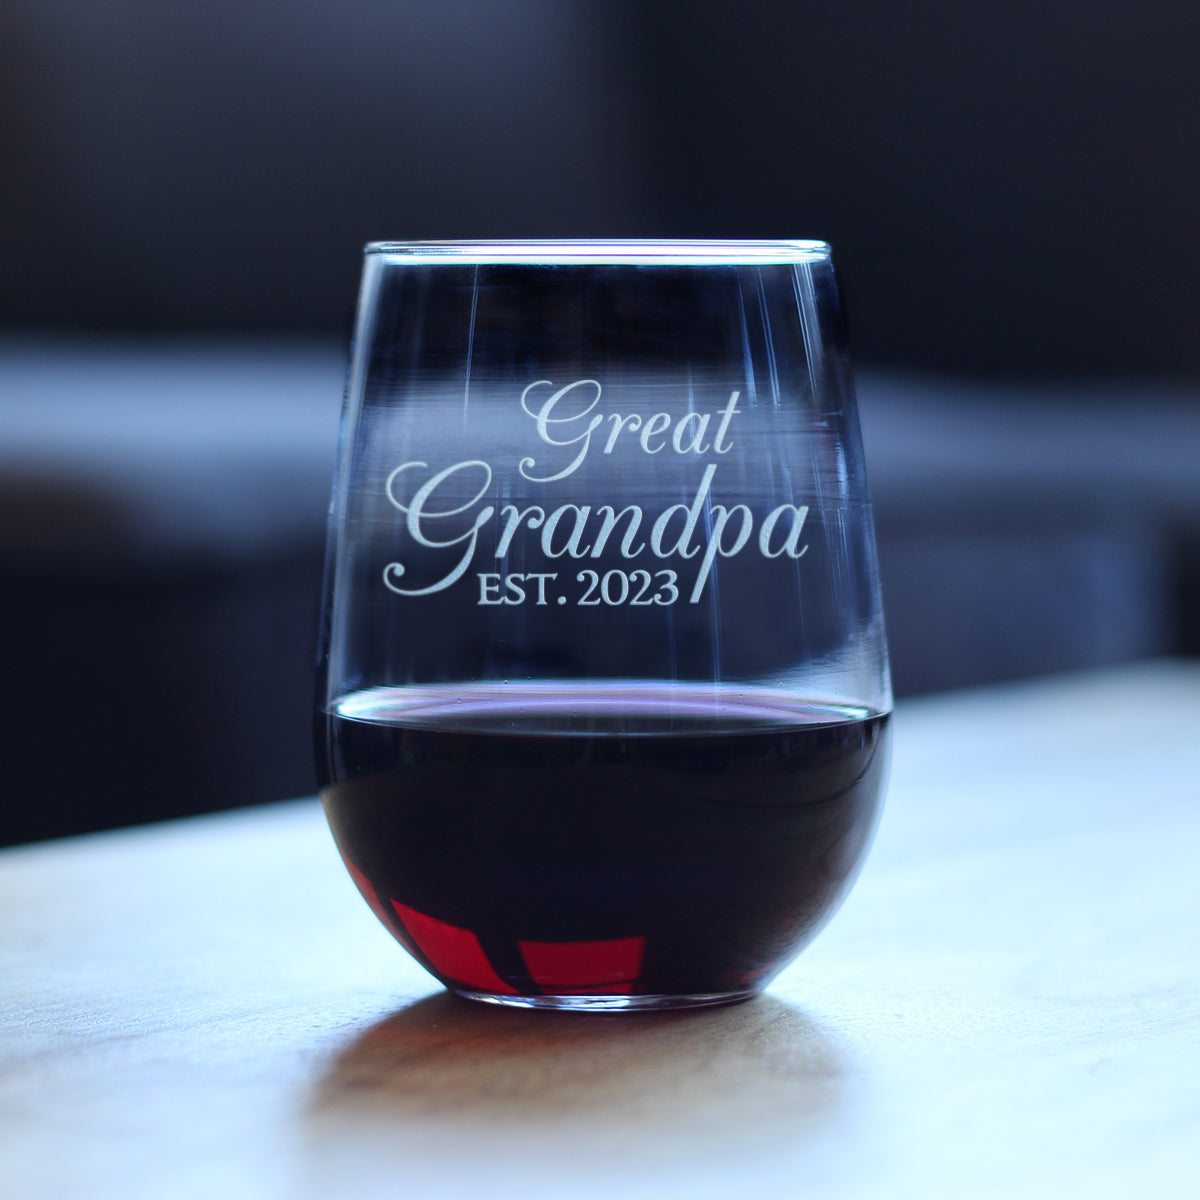 Great Grandpa Est 2023 - New Great Grandfather Stemless Wine Glass Gift for First Time Great Grandparents - Decorative 17 Oz Large Glasses